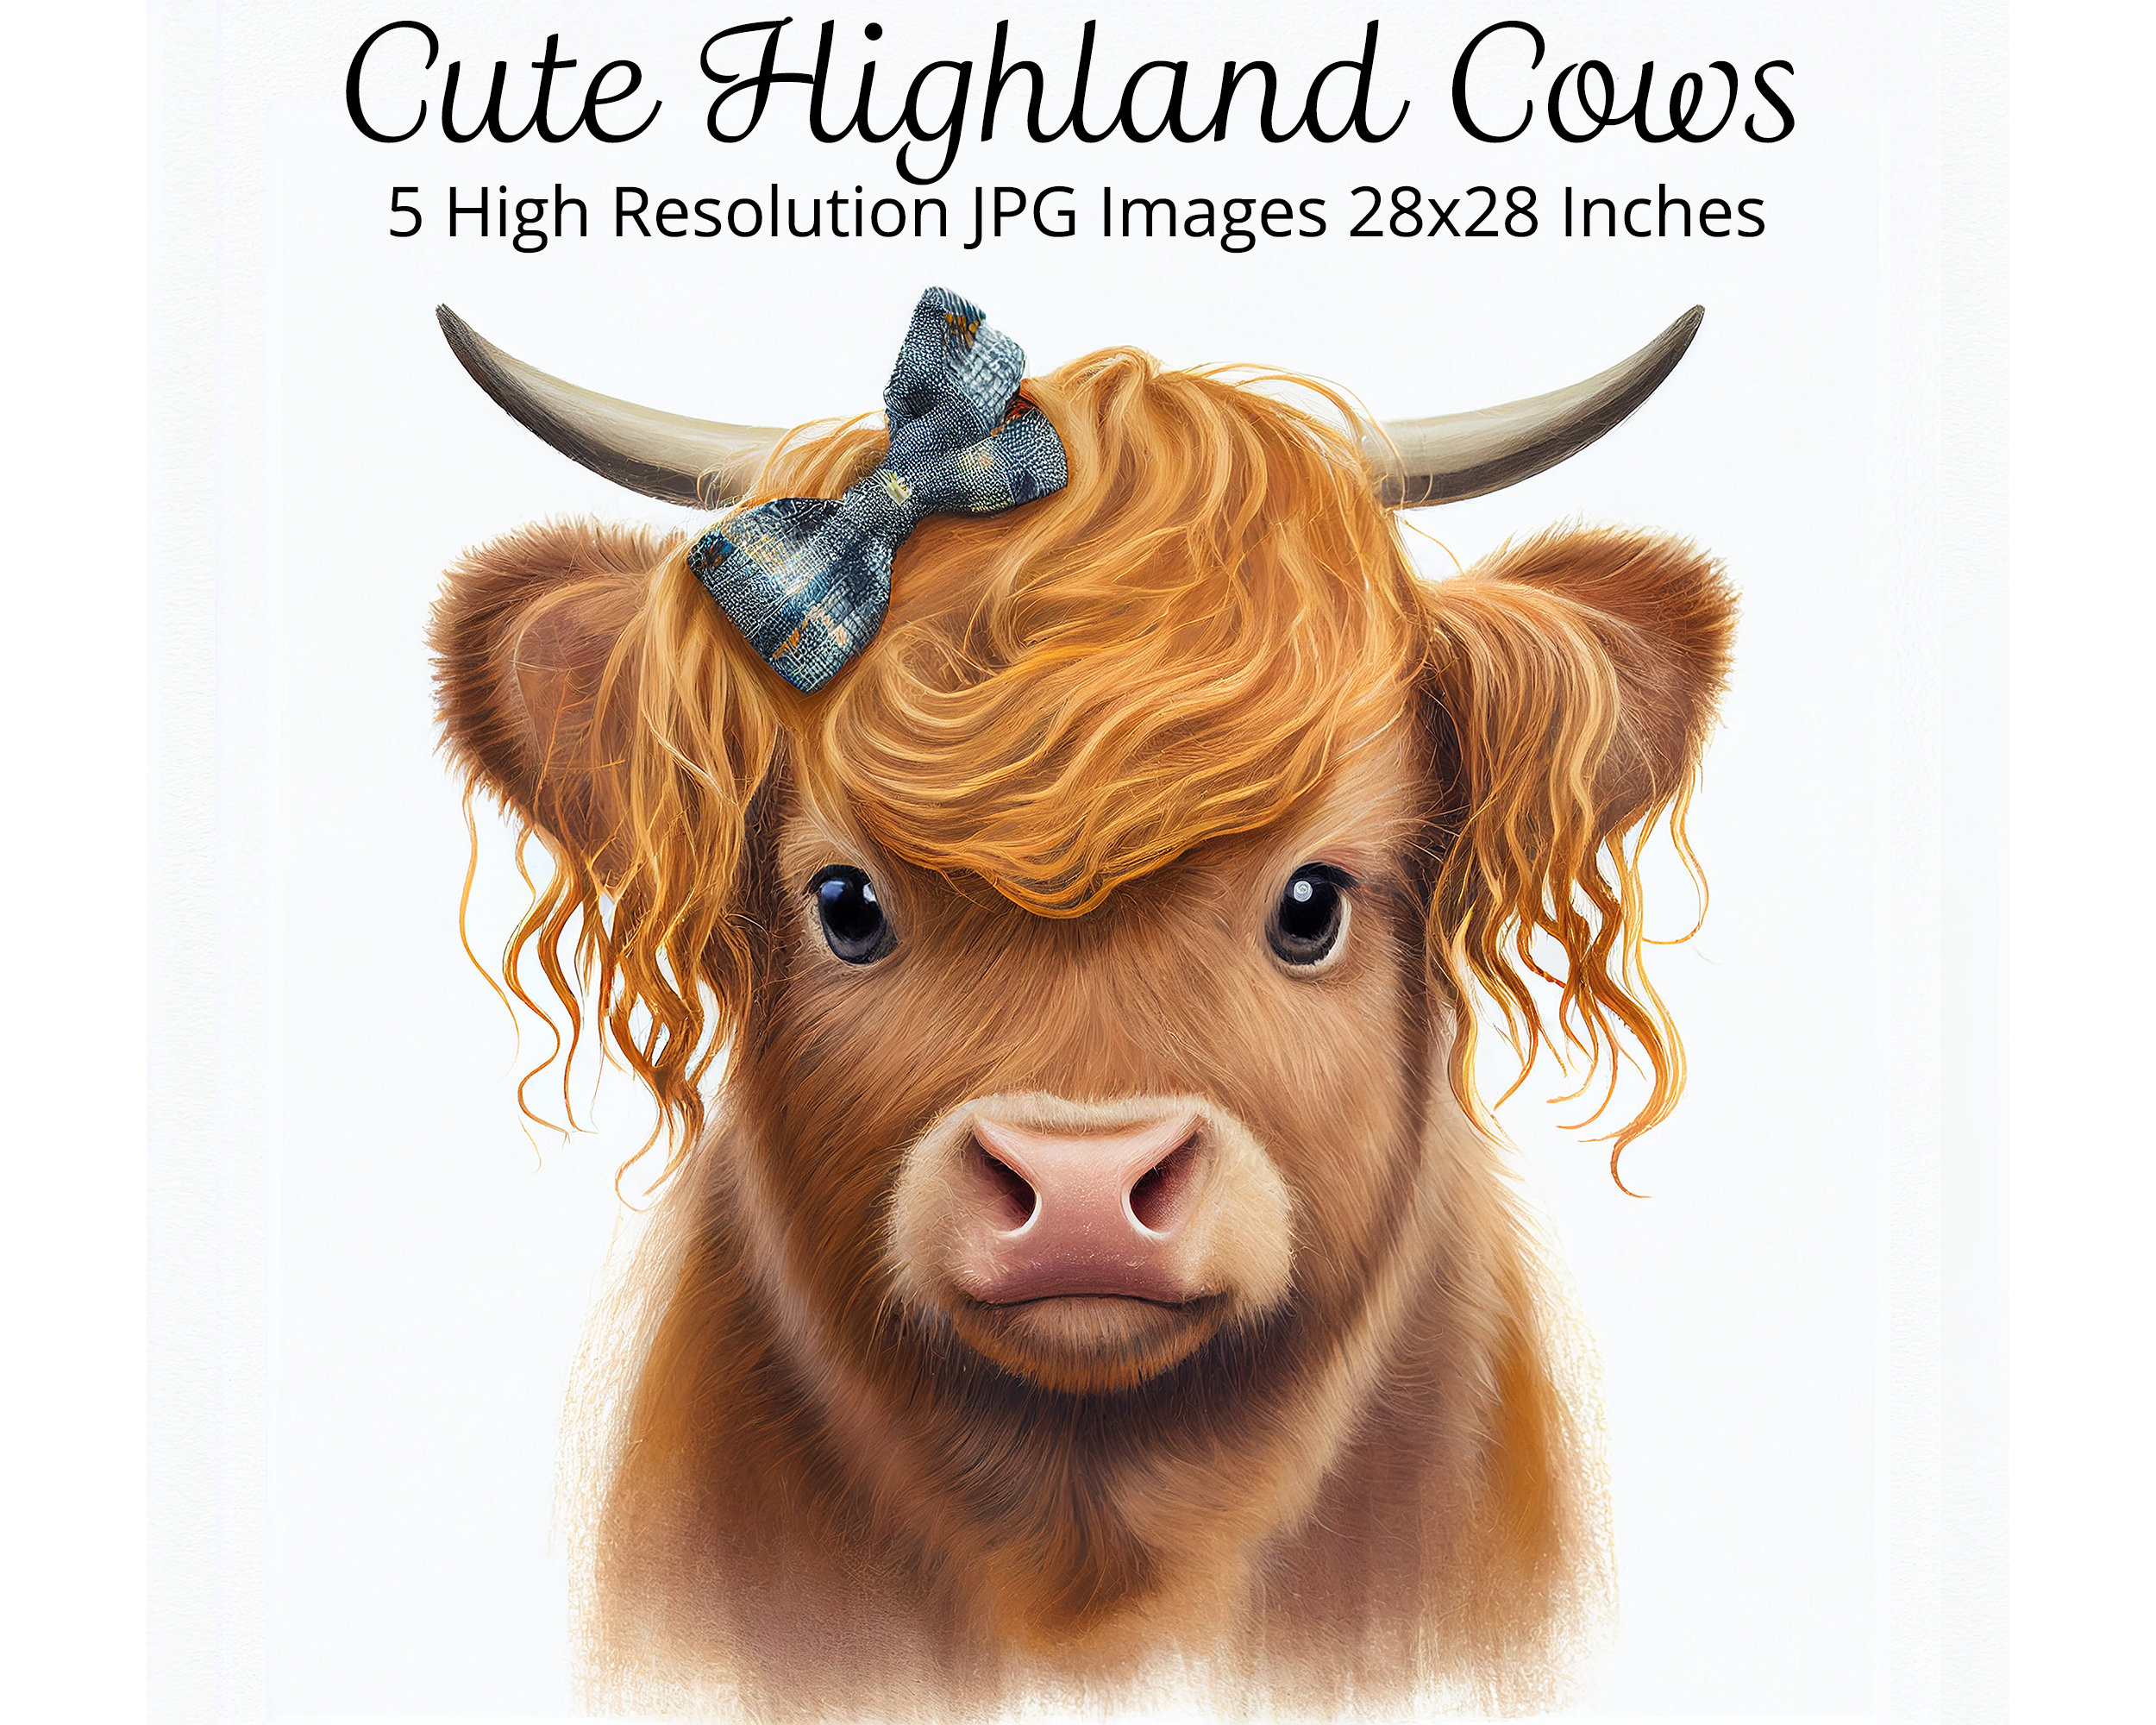 We love your cow!' - Lake Highlands